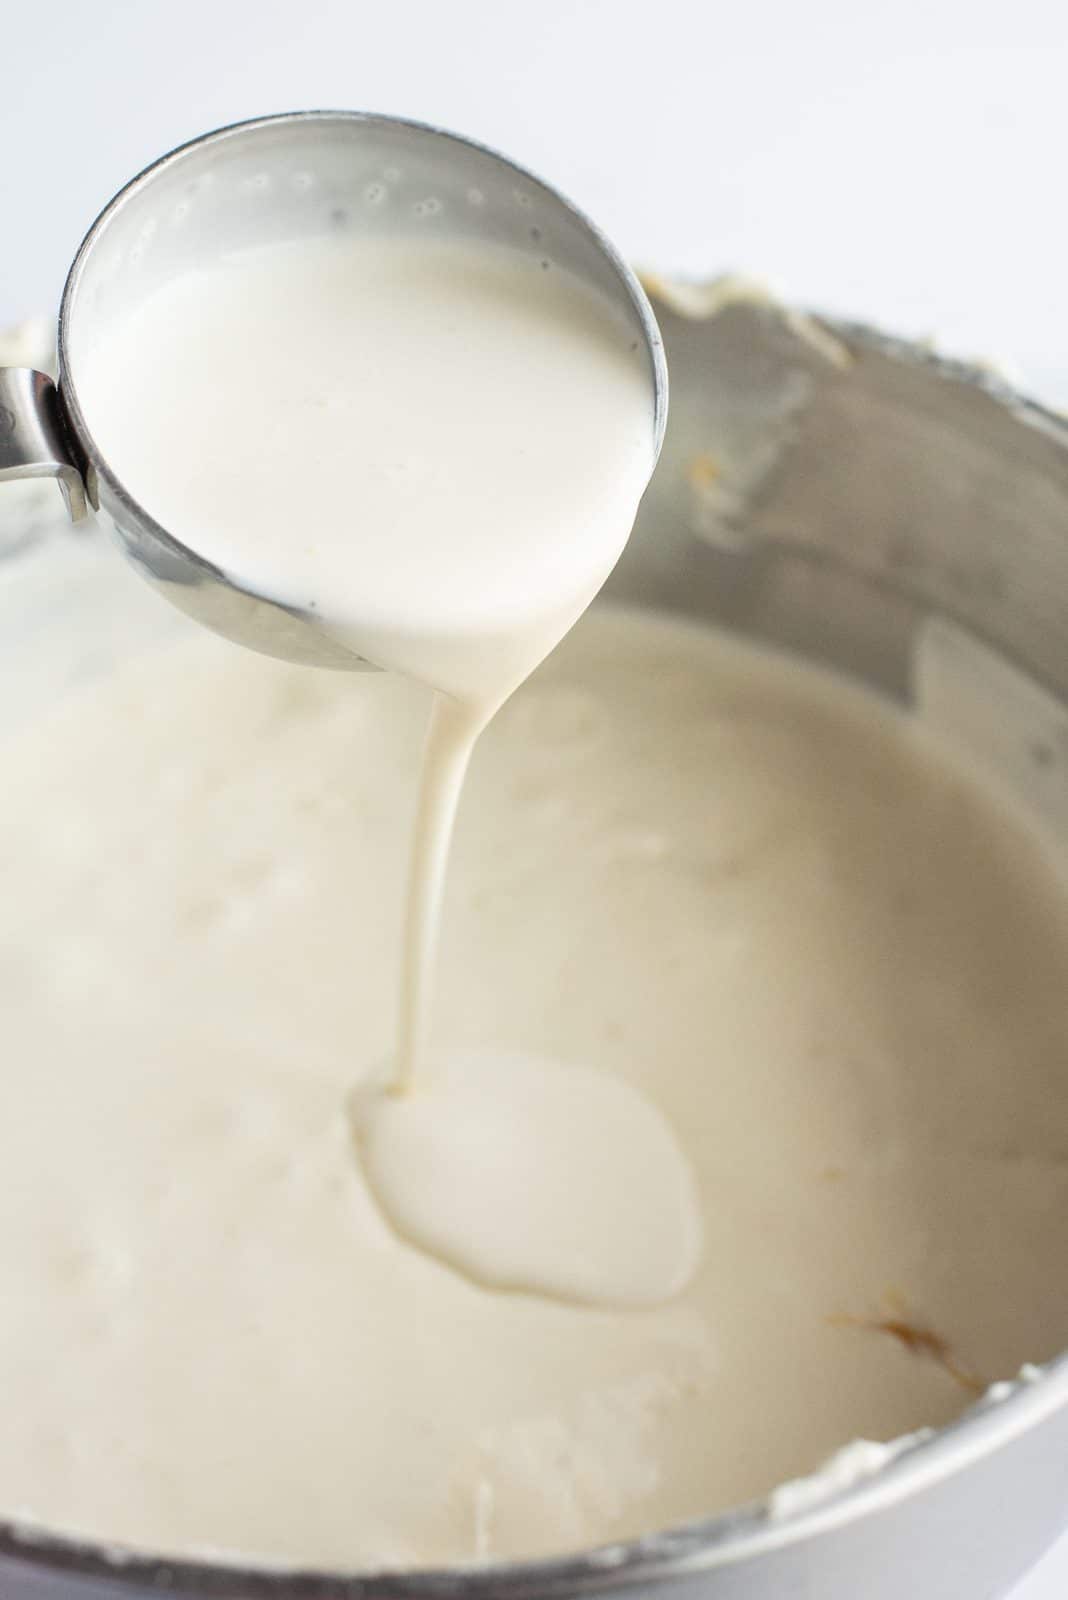 Eggs, egg yolks and heavy cream added to cream cheese mixture.